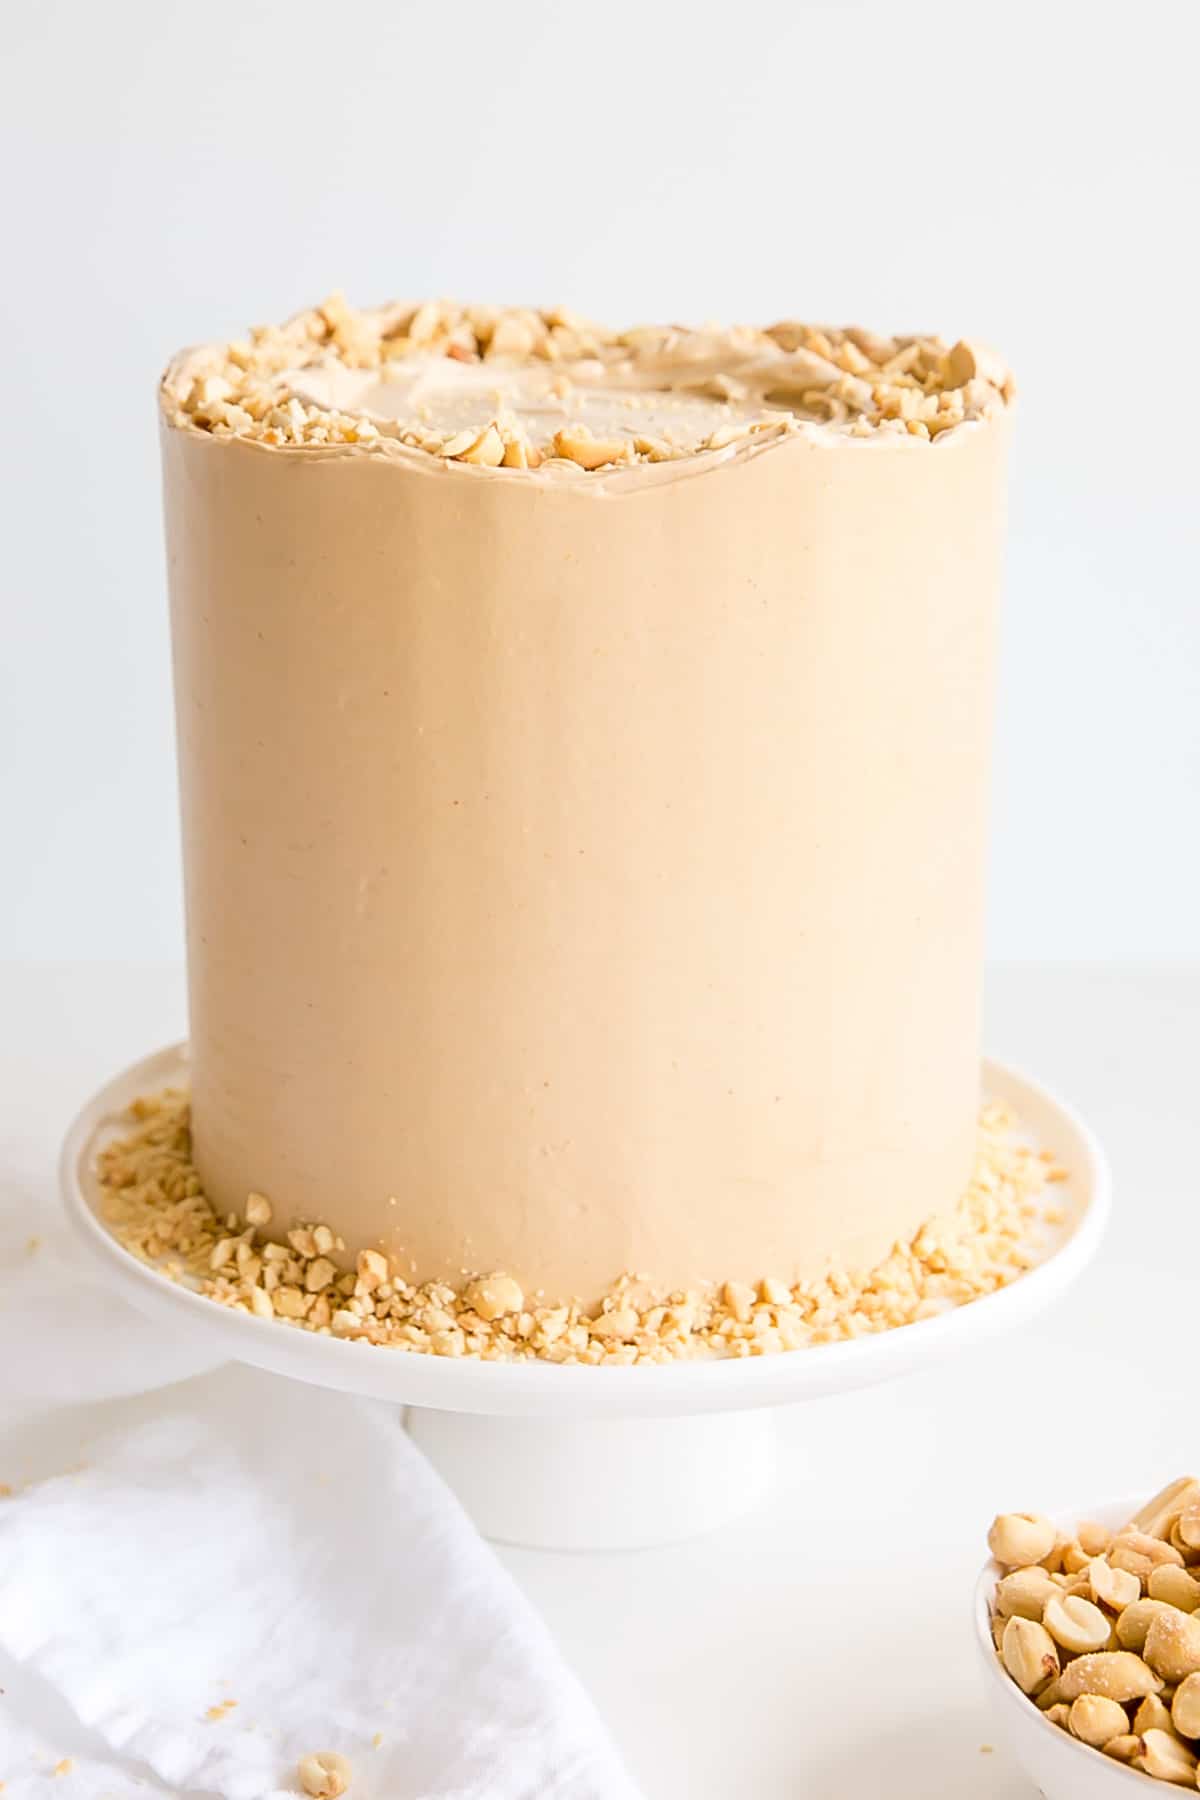 Peanut butter cake with fresh chopped peanuts.